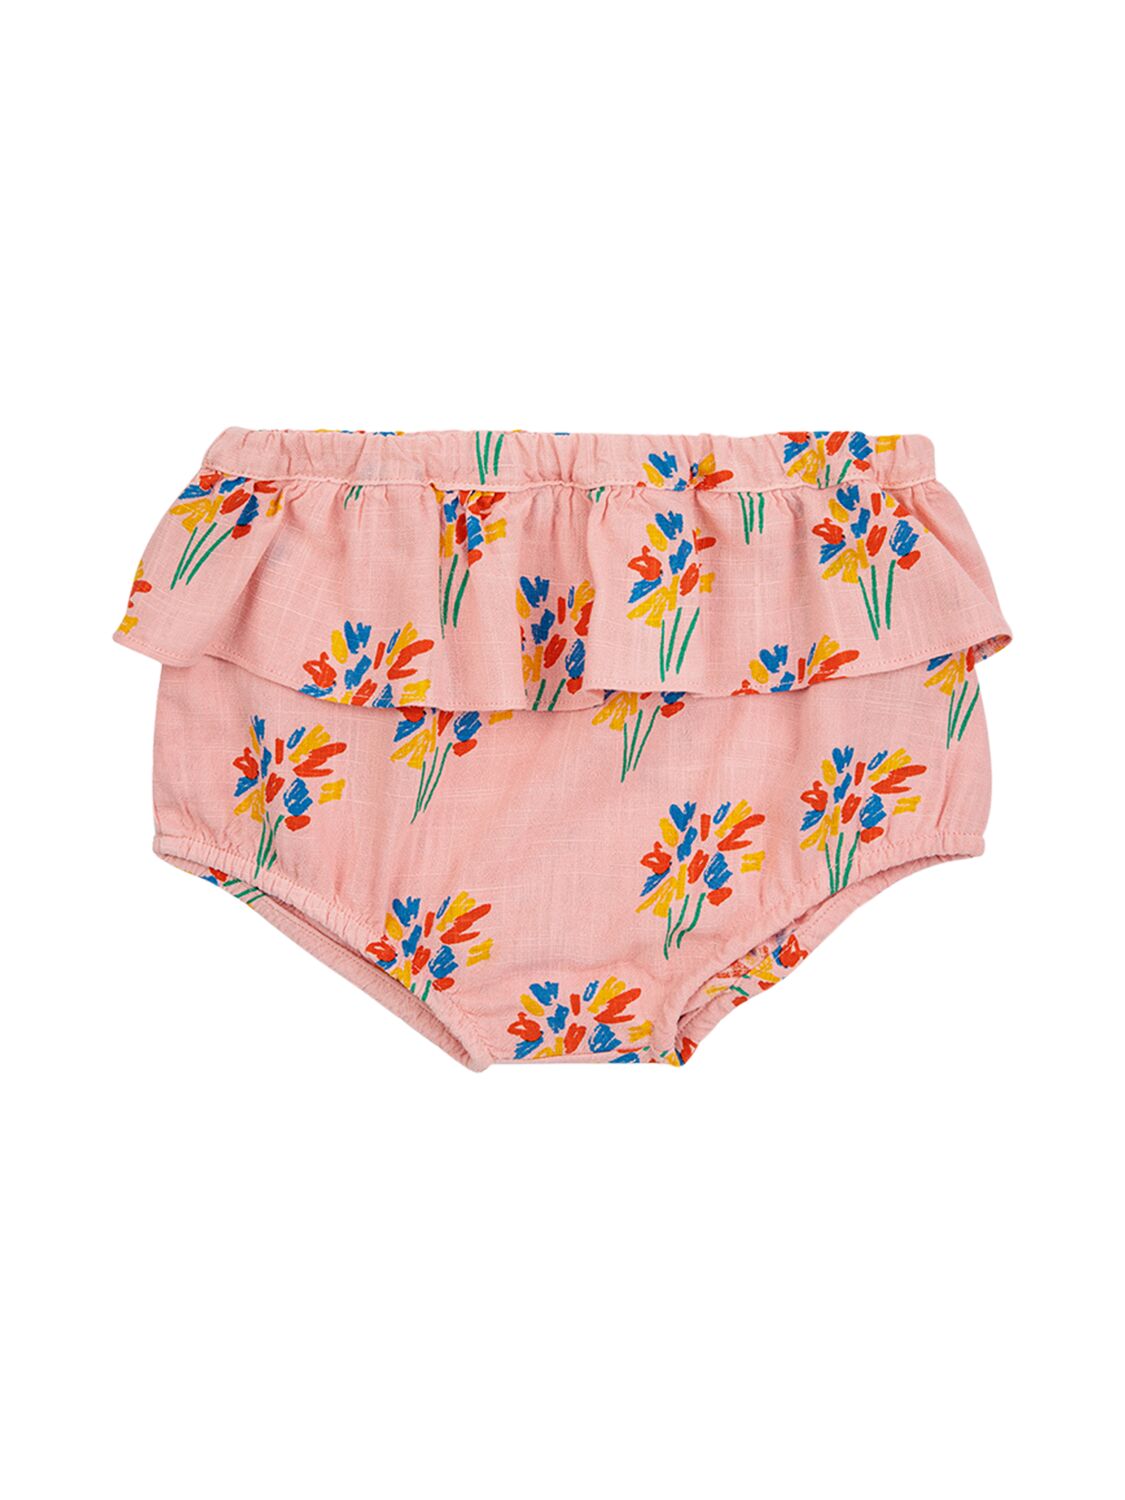 Bobo Choses Babies' Printed Linen Blend Diaper Cover In Pink